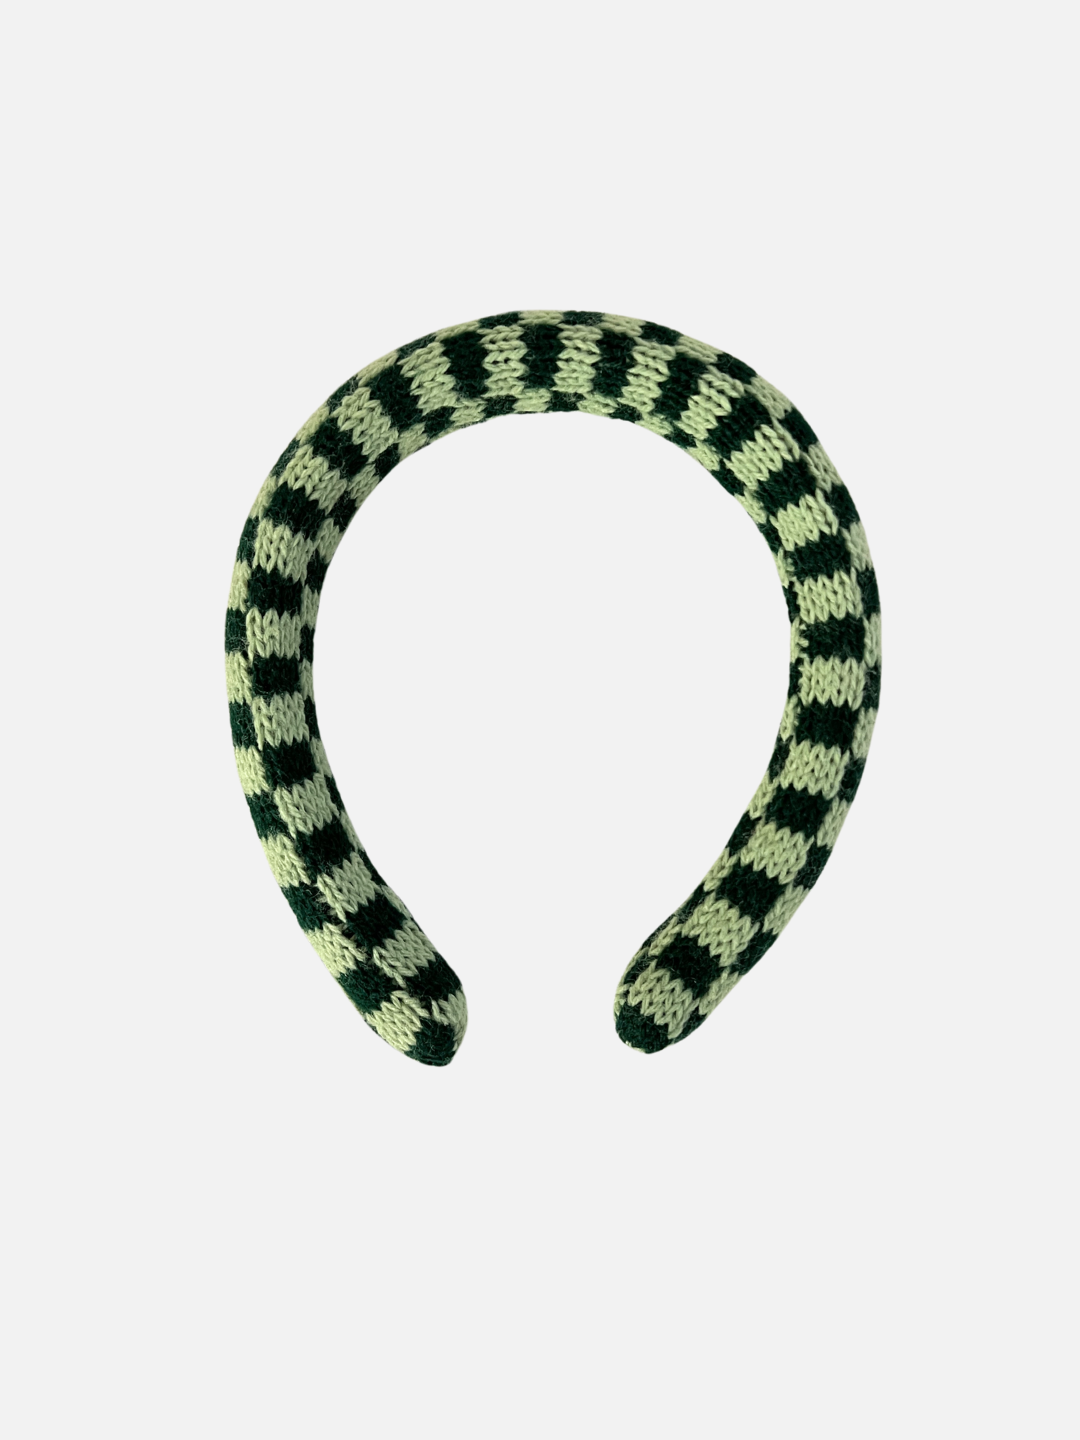 Green Checks | A kids' knitted headband in a forrest green and light green check